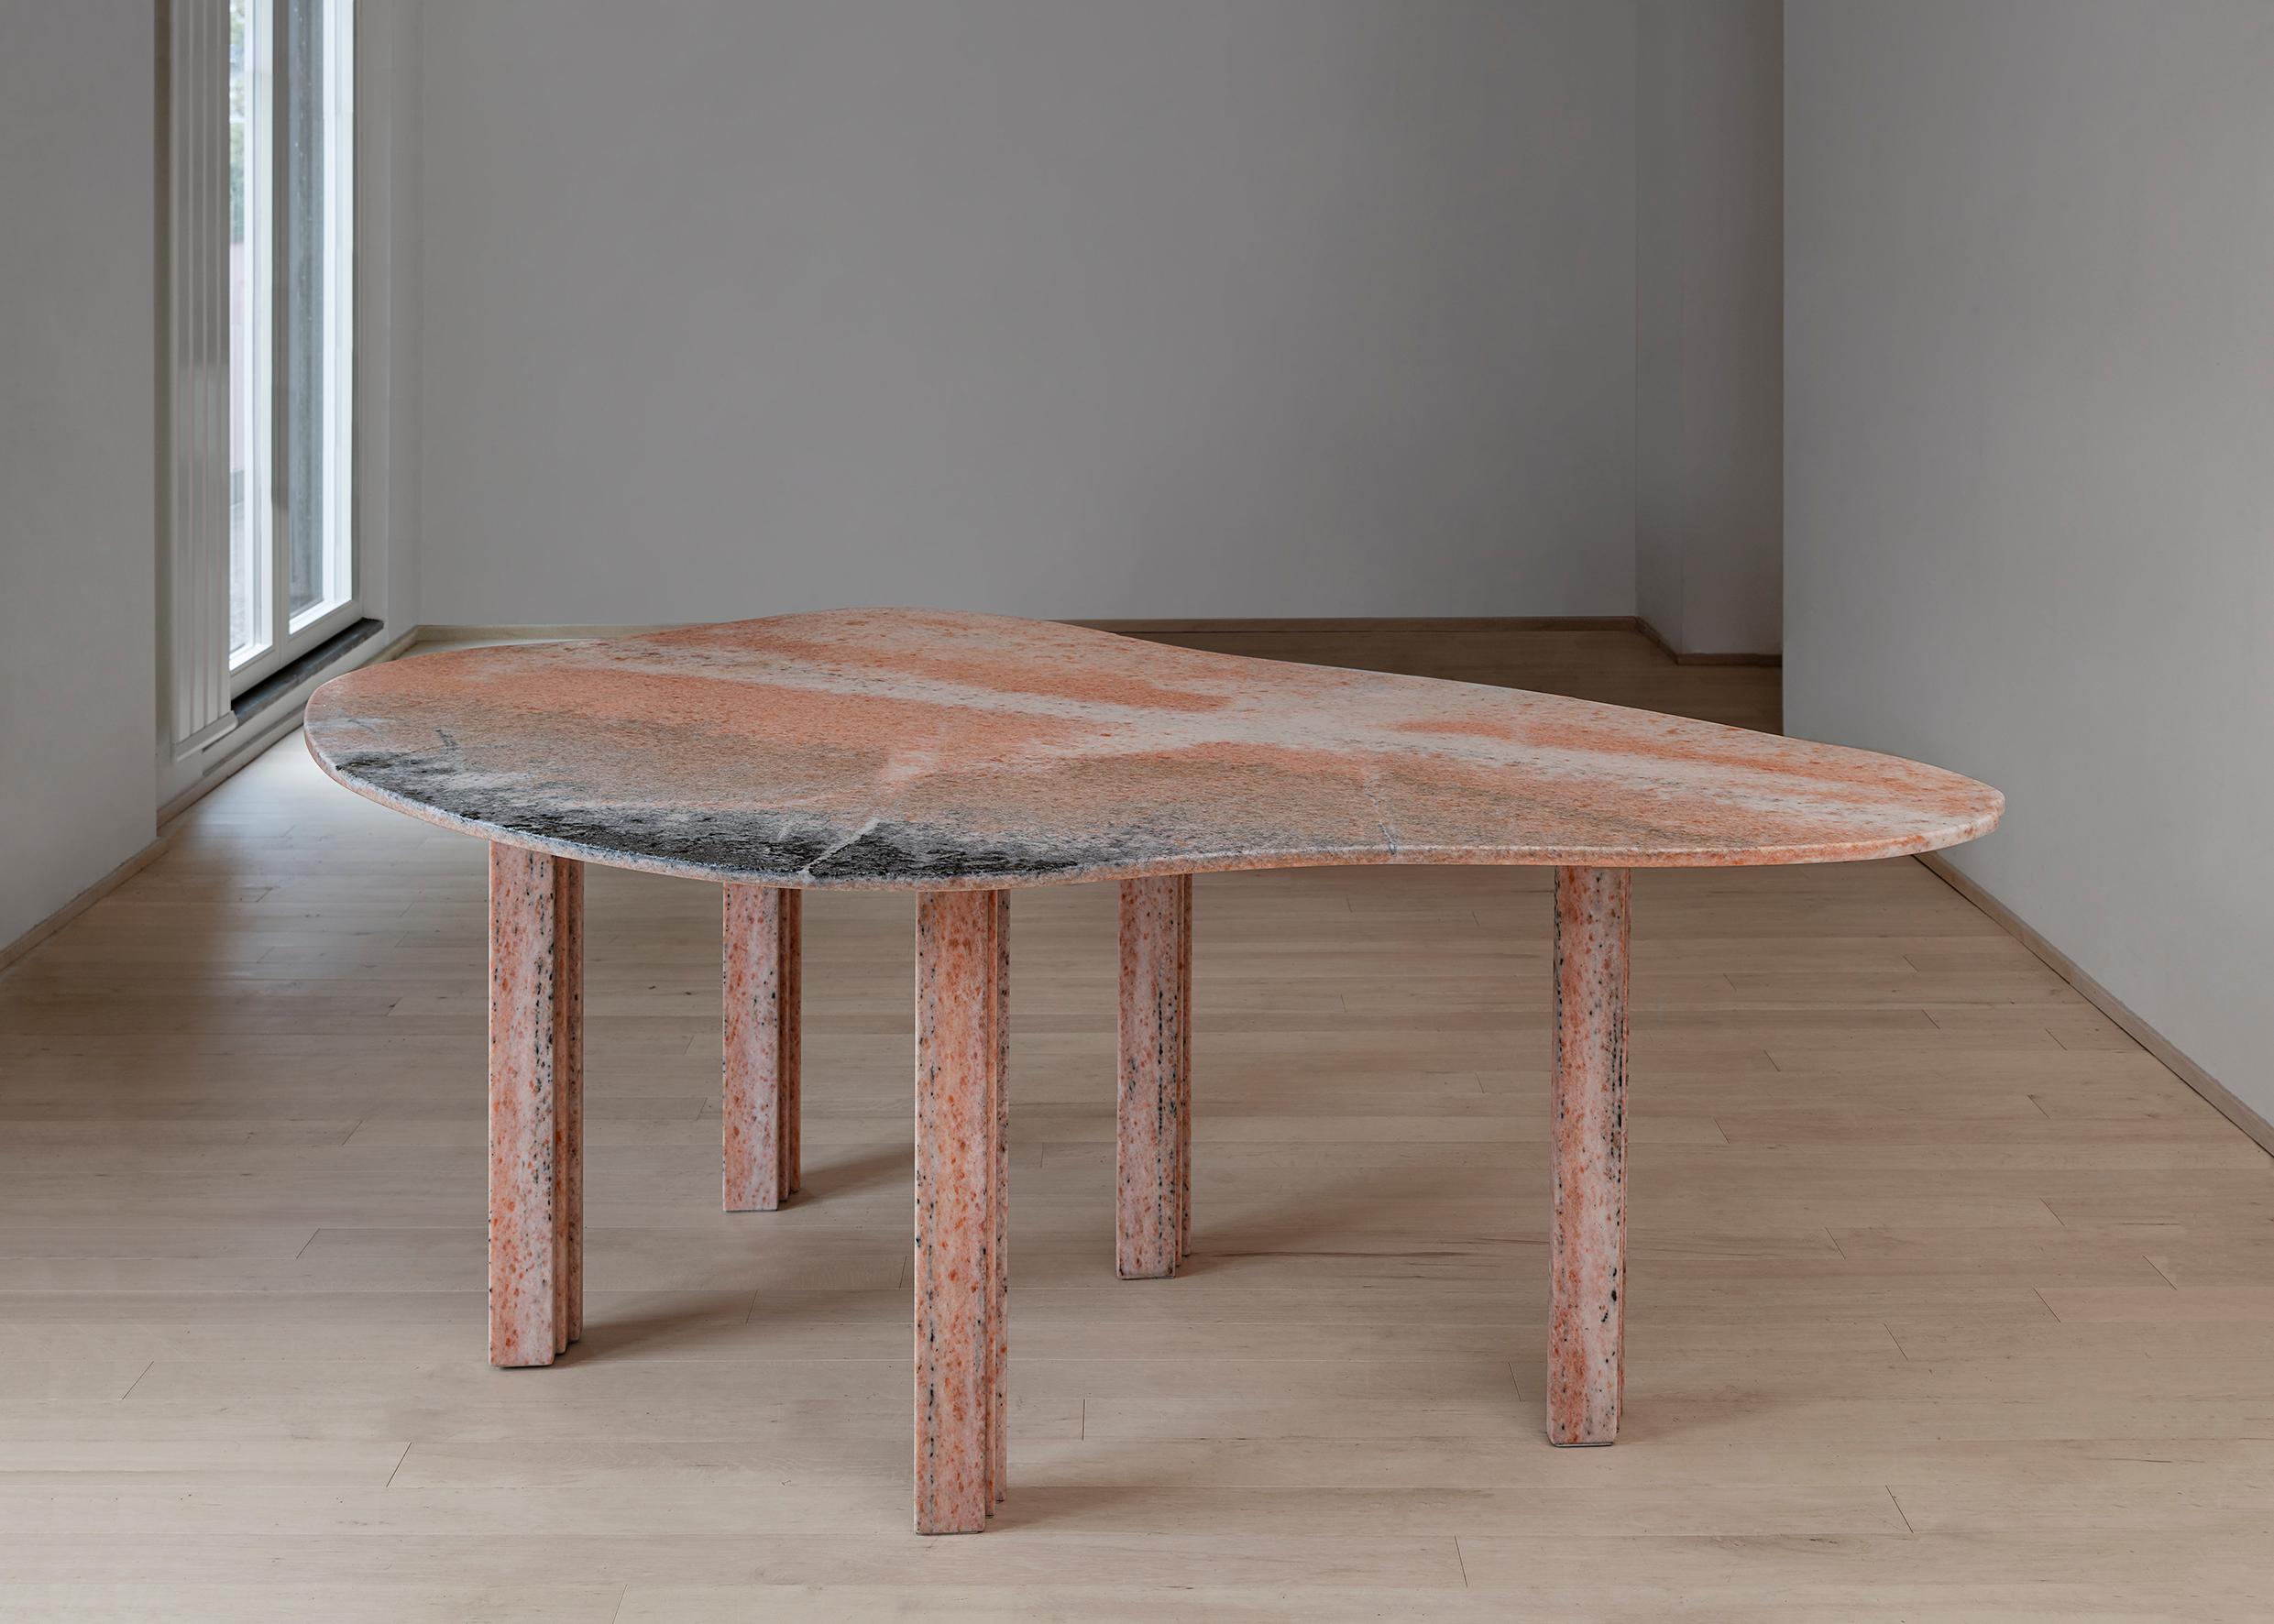 Sculptural pear marble coffee table, Lorenzo Bini
Title: Pear
Measures: L 102 x W 62.5 x H 37 cm 
Materials: Ornavasso 

Also available as a dining table 

Six tableaux is a series of marble tables designed by Lorenzo Bini and built by Atzara